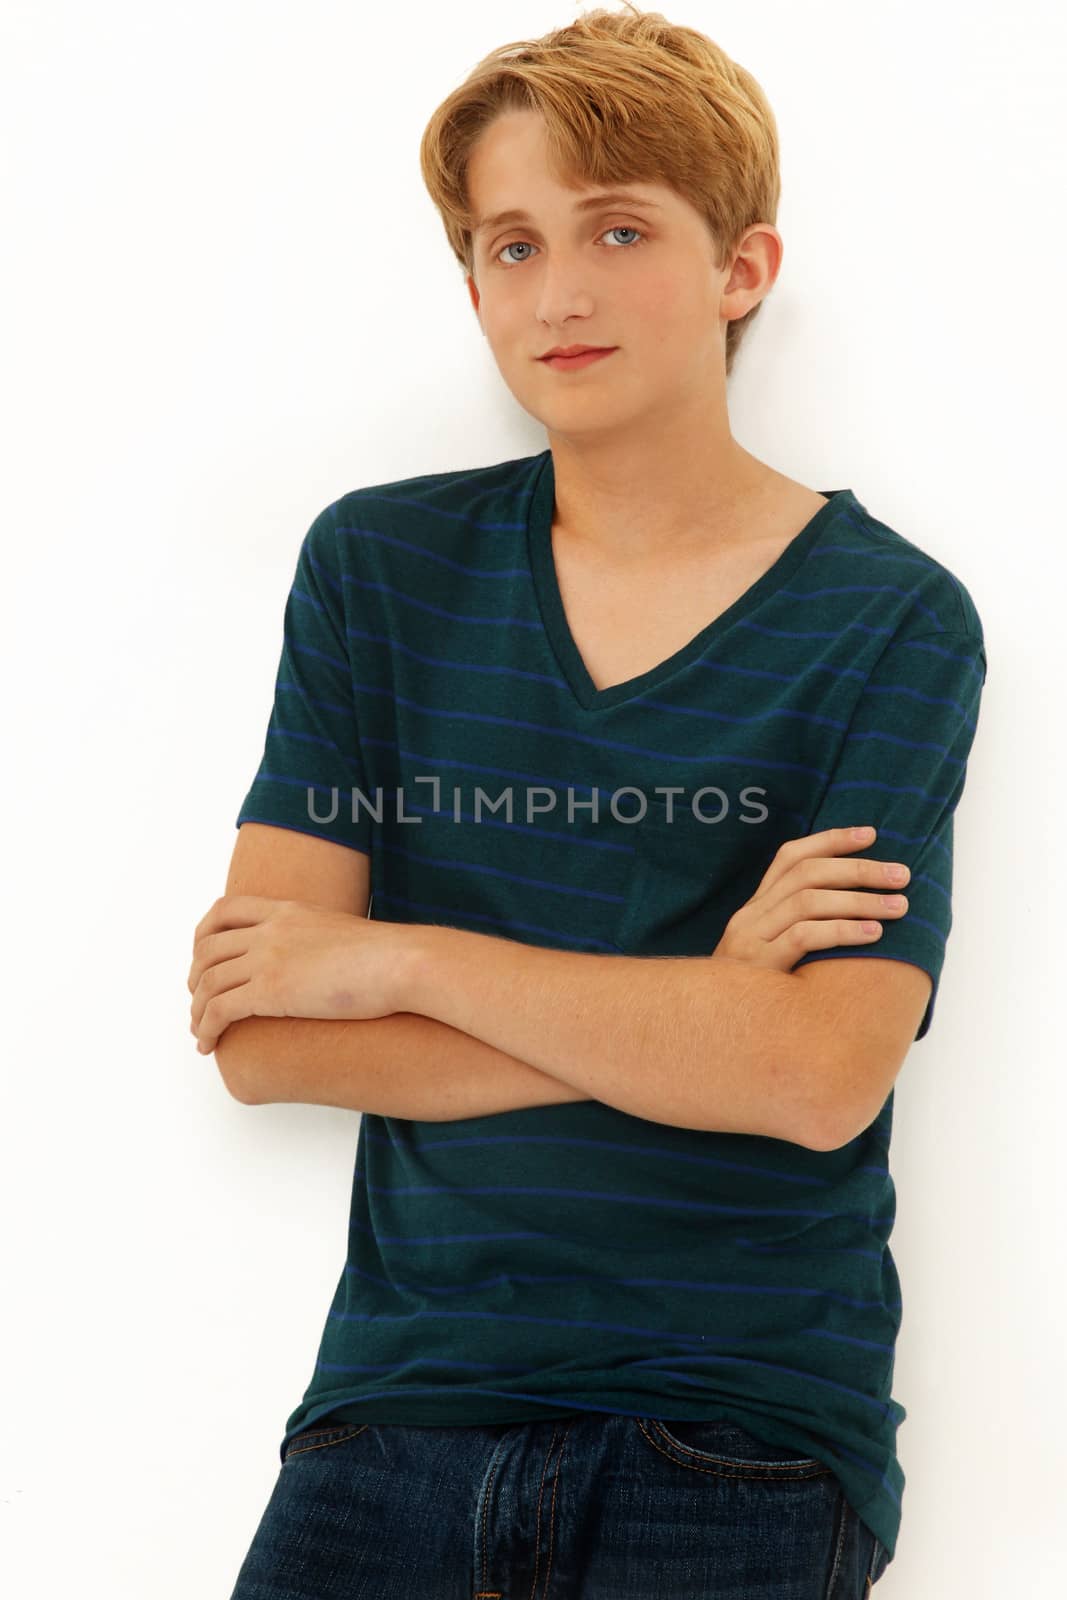 Attractive Teen Boy Caucasian leaning on wall with arms crossed.